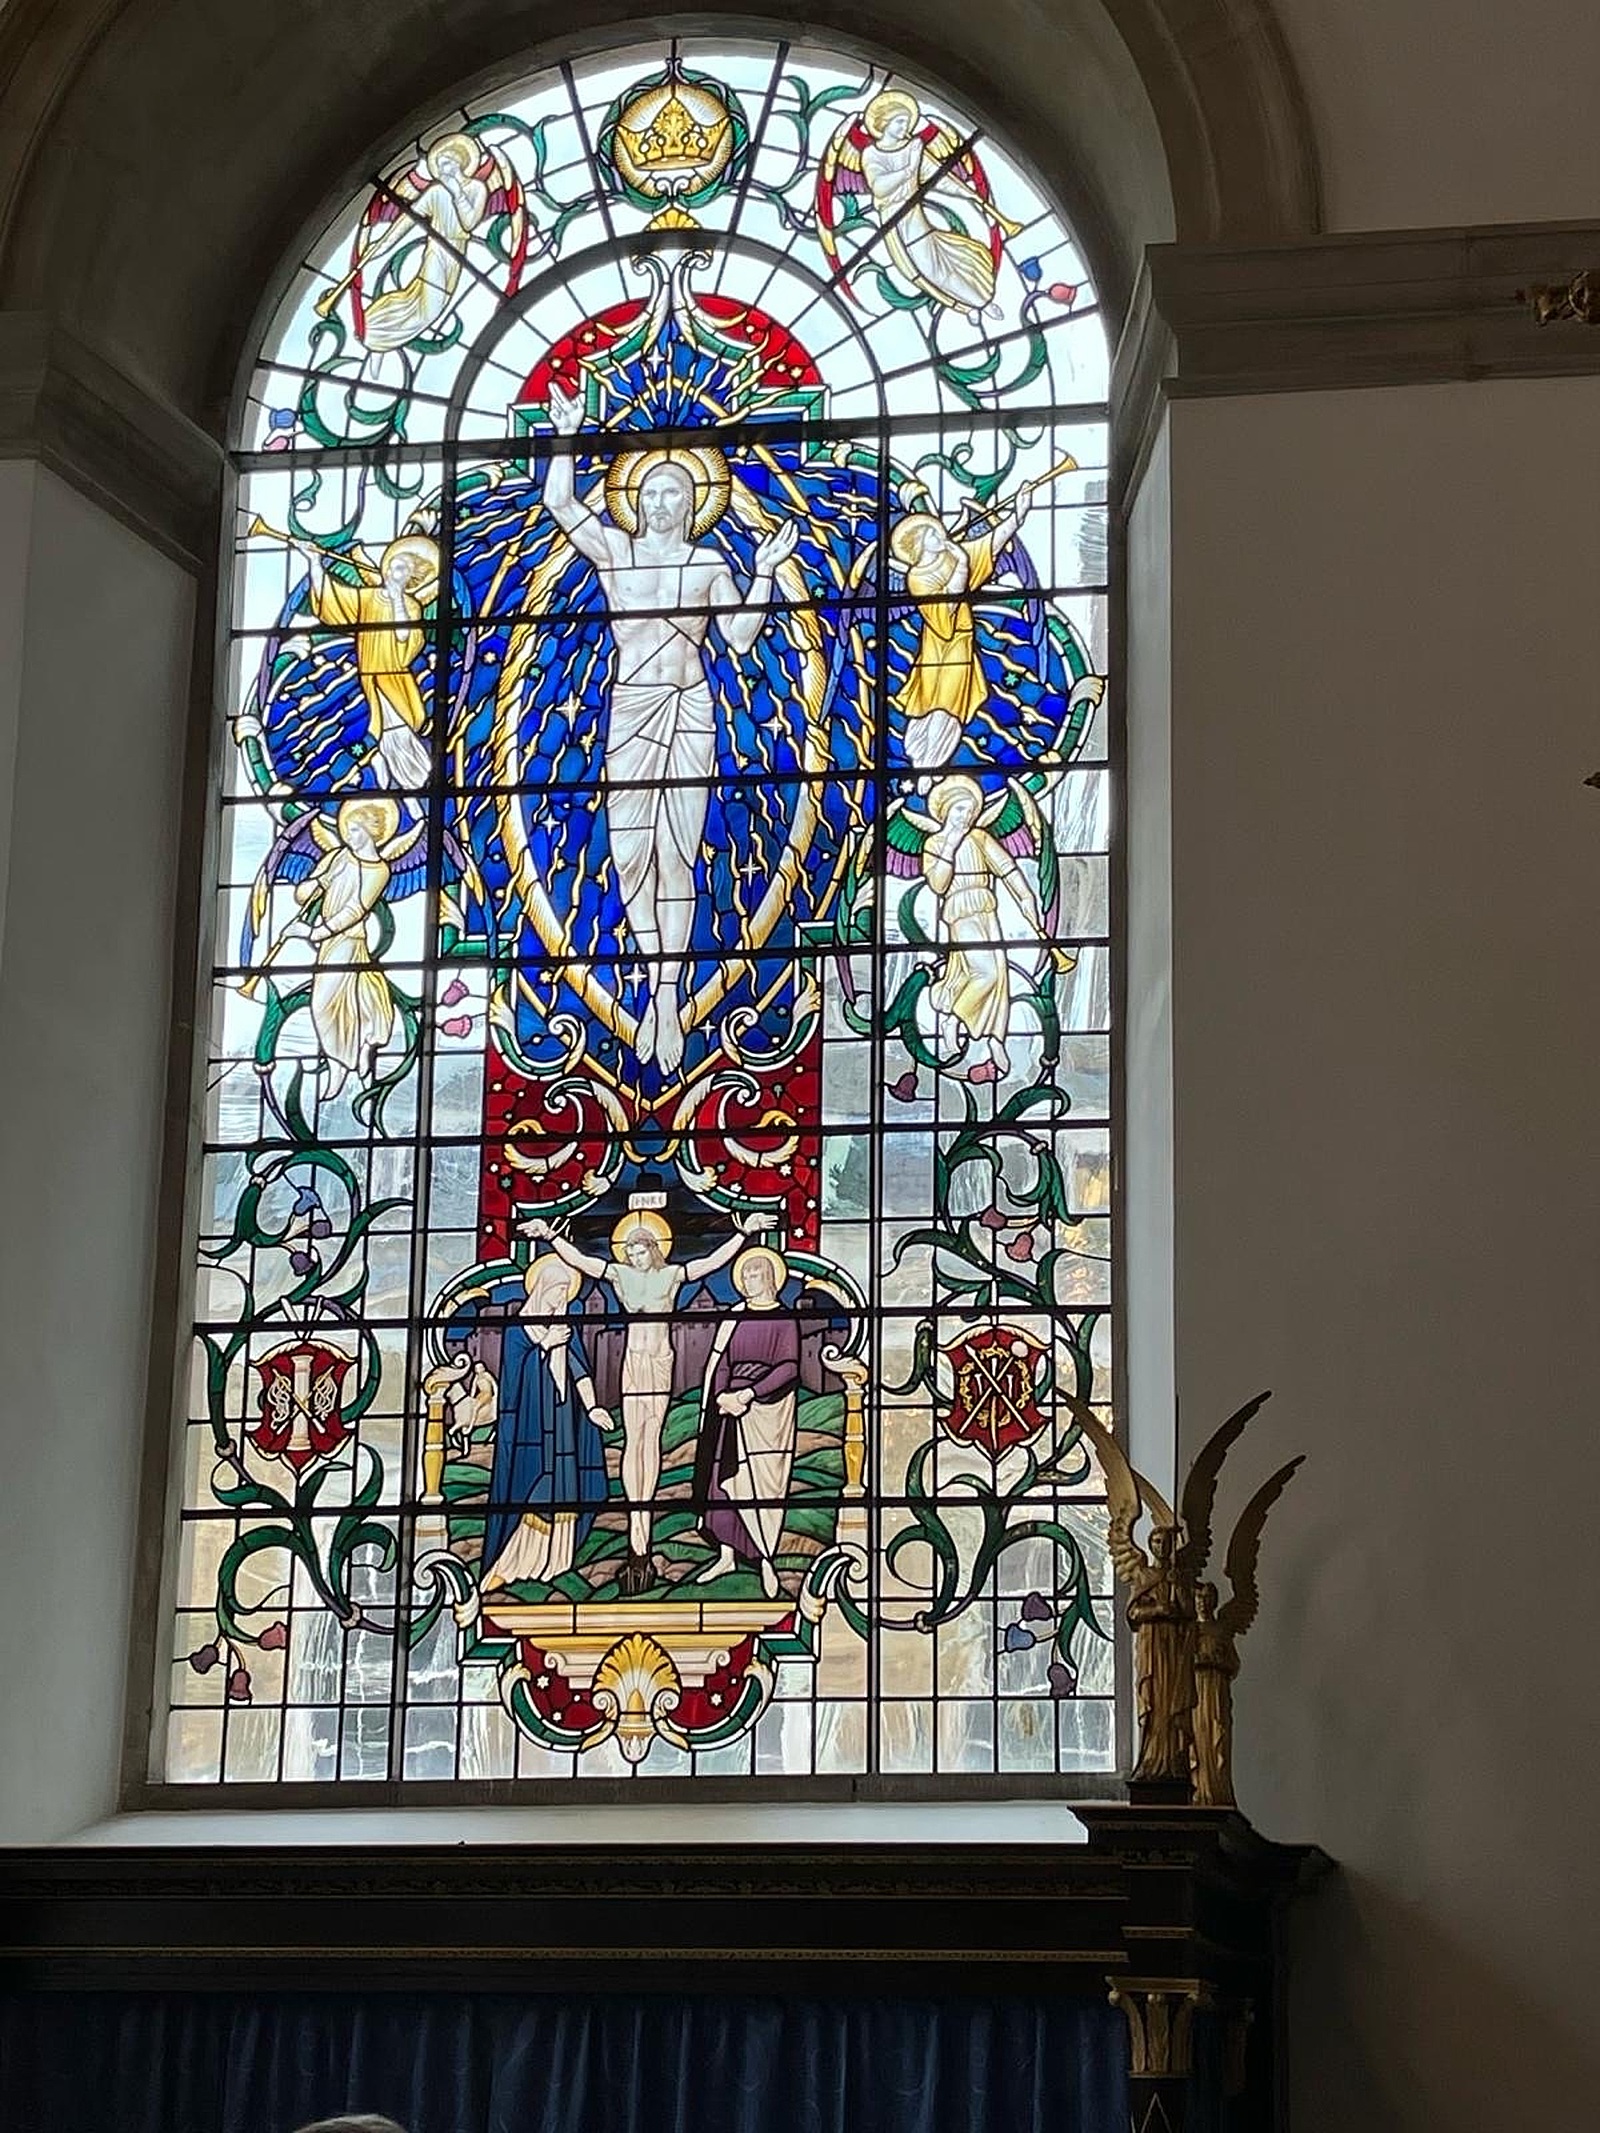 The stained glass windows in Commonwealth Chapel in St. Lawrence Jewry